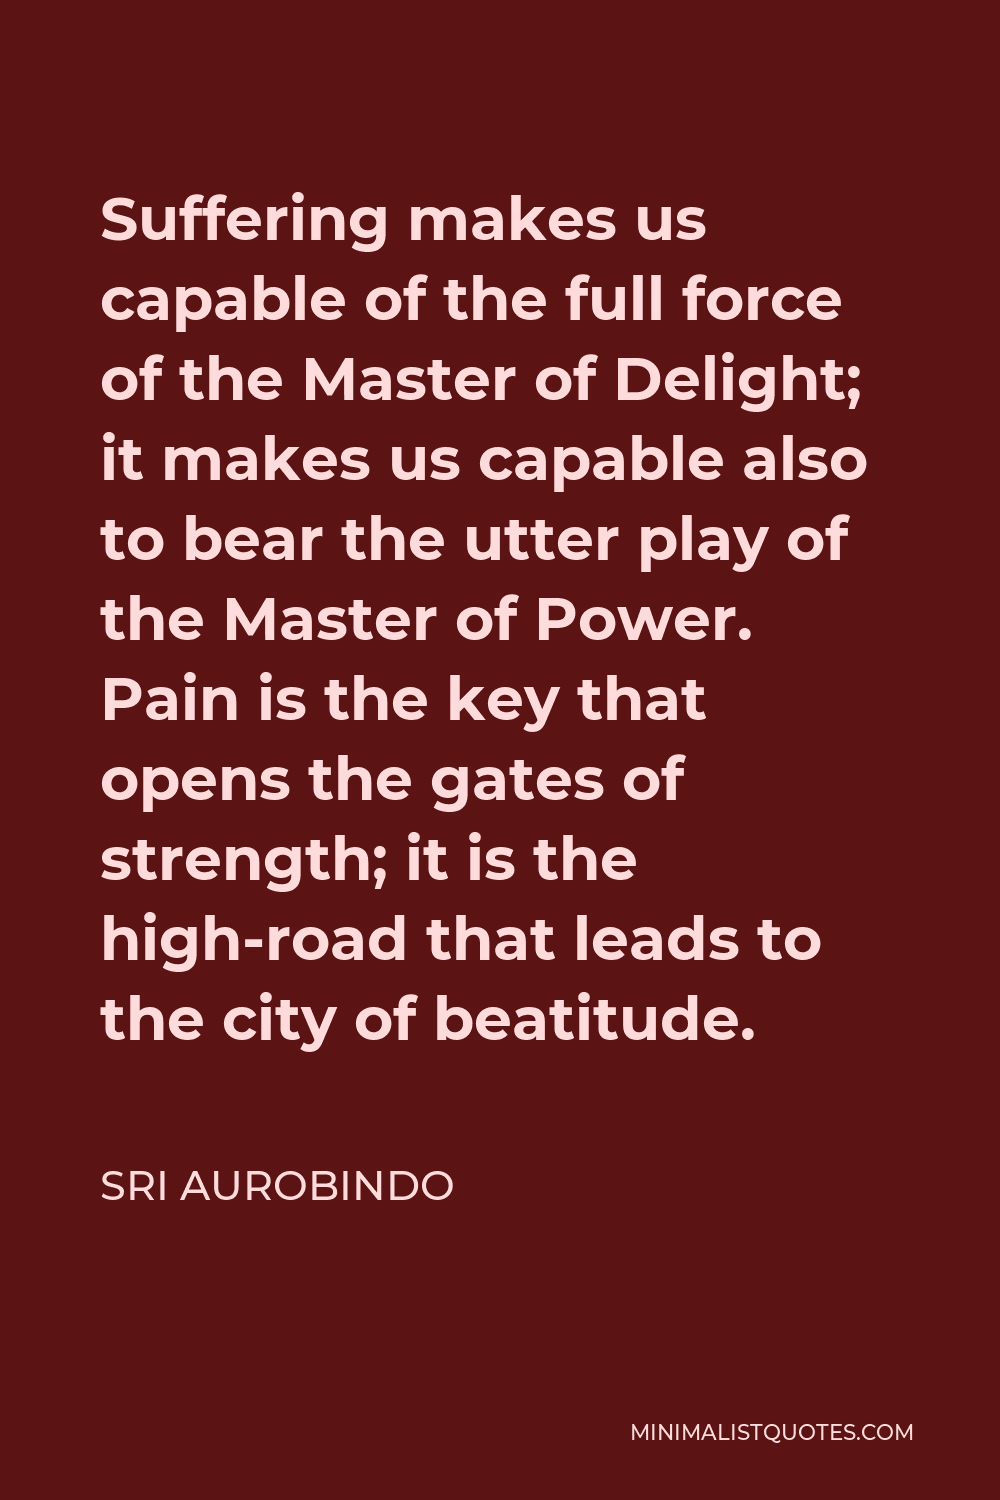 Sri Aurobindo Quote - Suffering makes us capable of the full force of the Master of Delight; it makes us capable also to bear the utter play of the Master of Power. Pain is the key that opens the gates of strength; it is the high-road that leads to the city of beatitude.